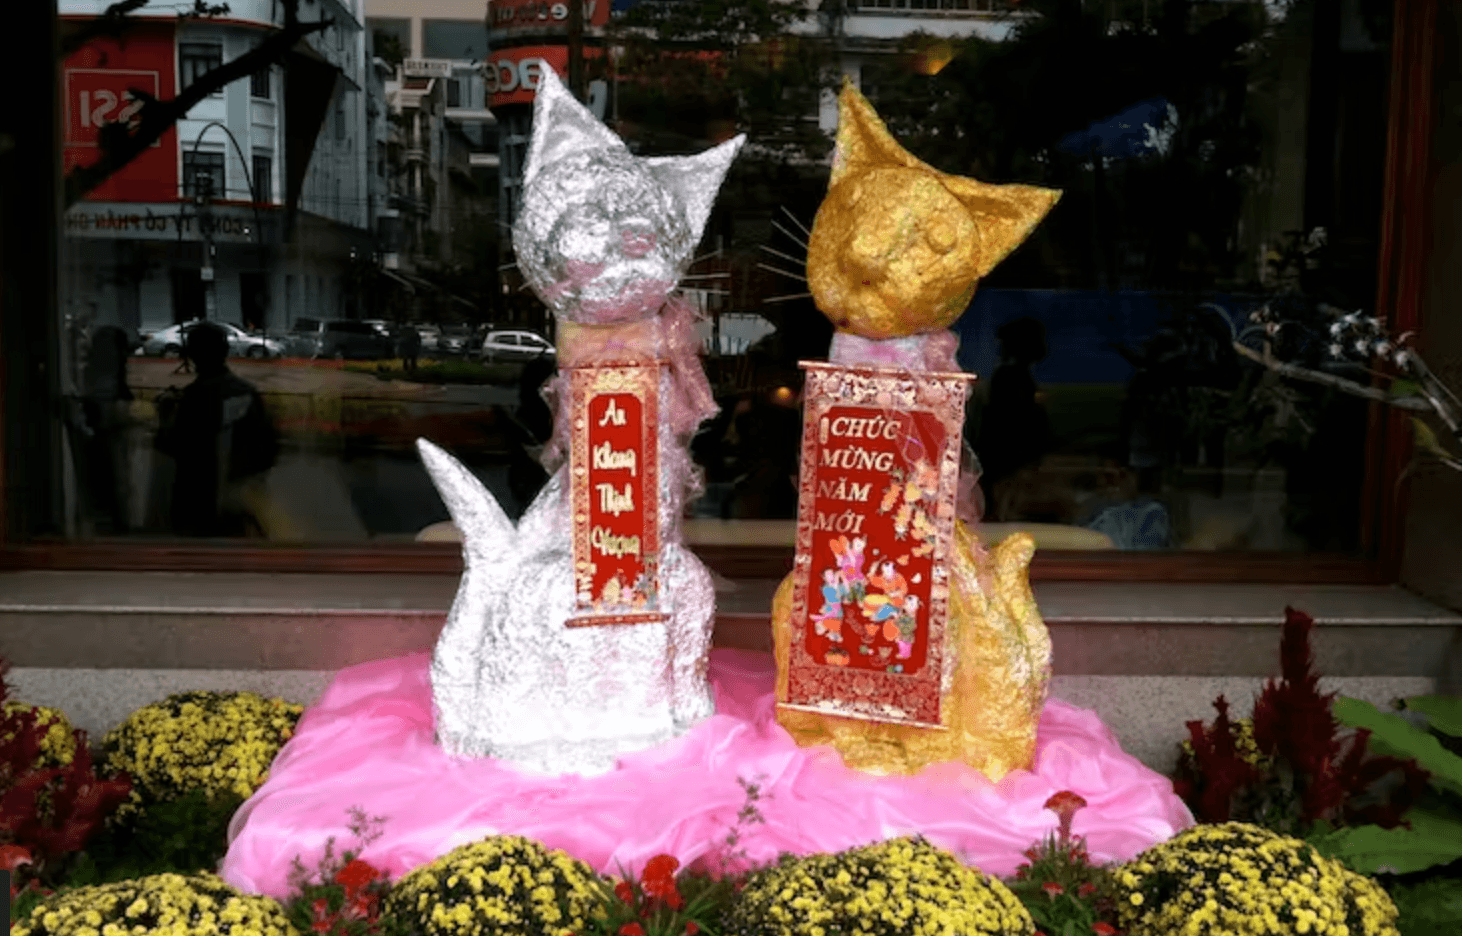 This lunar year will be the Year of the Rabbit or the Year of the Cat, depending on where you live